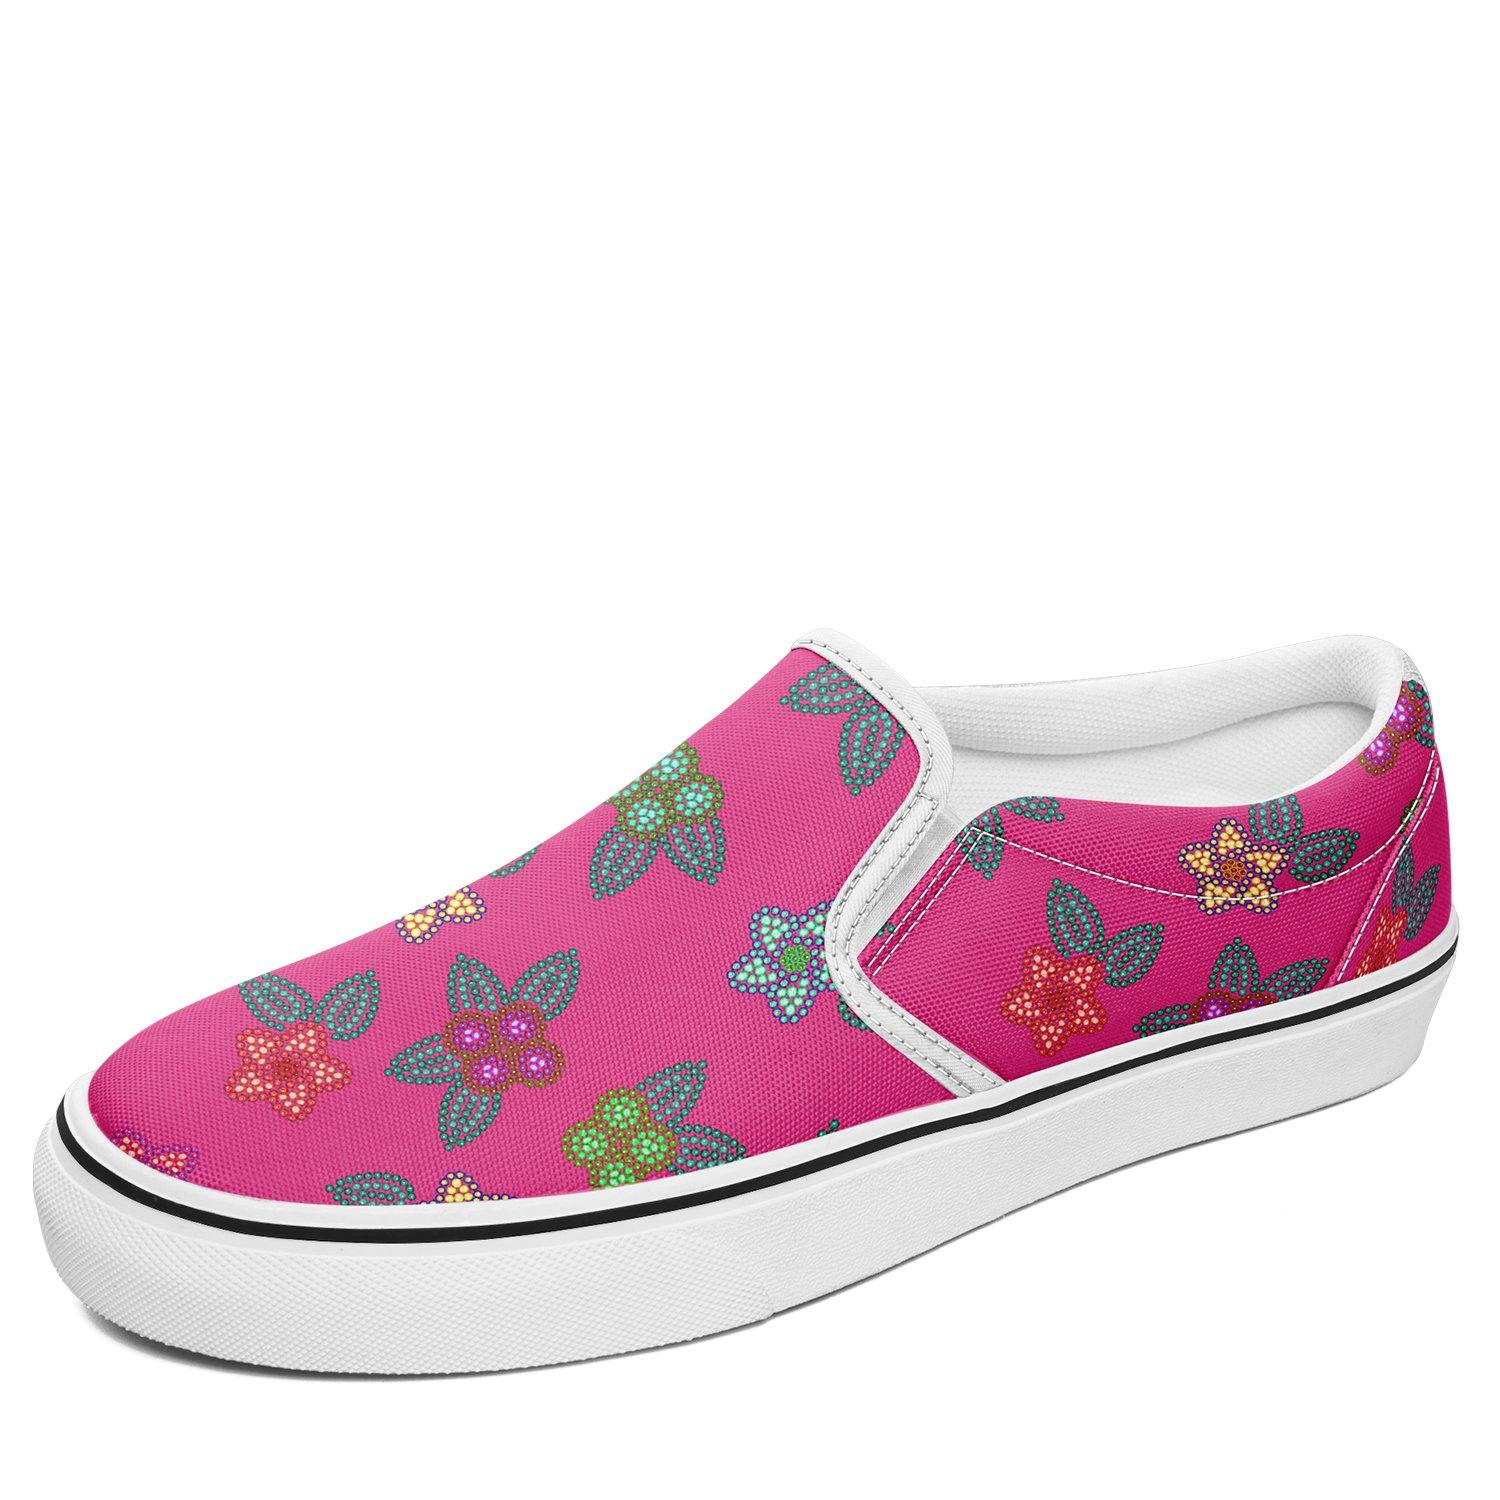 Berry Flowers Otoyimm Canvas Slip On Shoes otoyimm Herman 